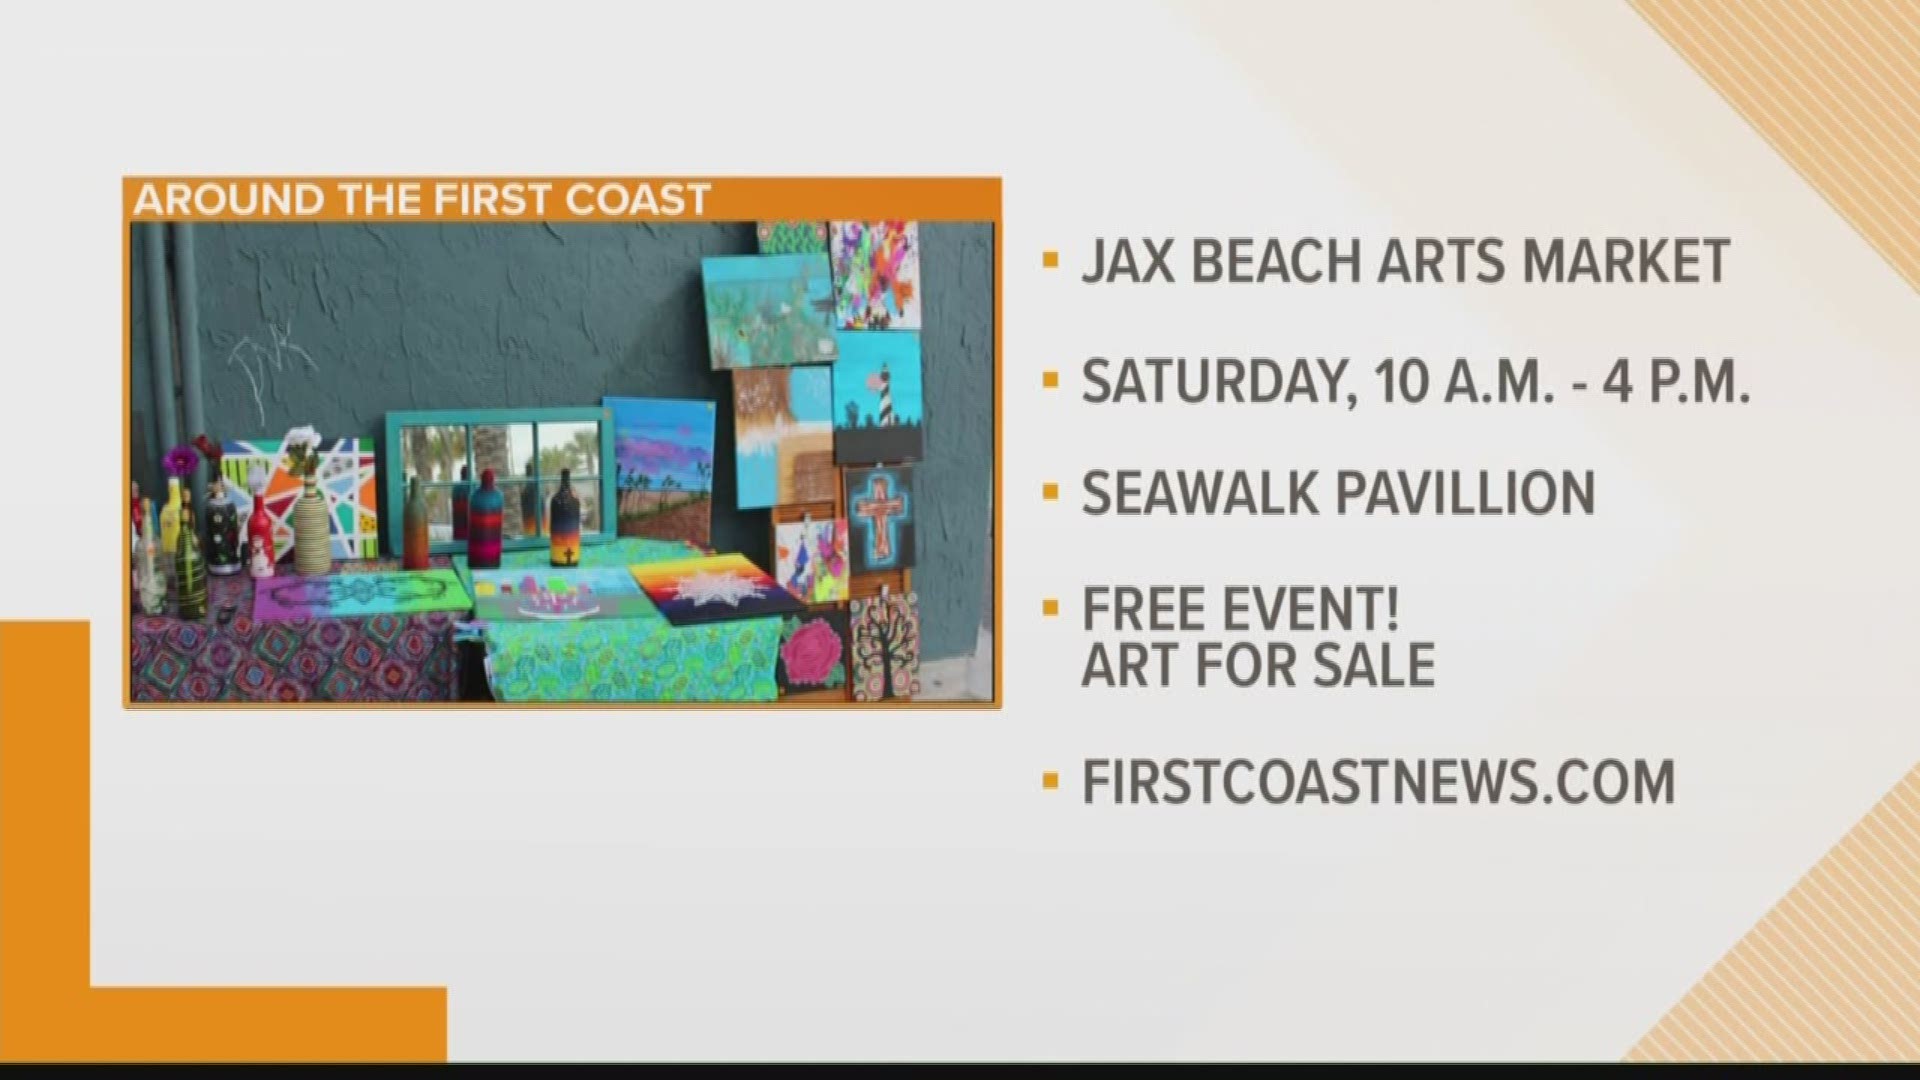 Arts market, seafood and so much more! Here are your top weekend events on the First Coast.